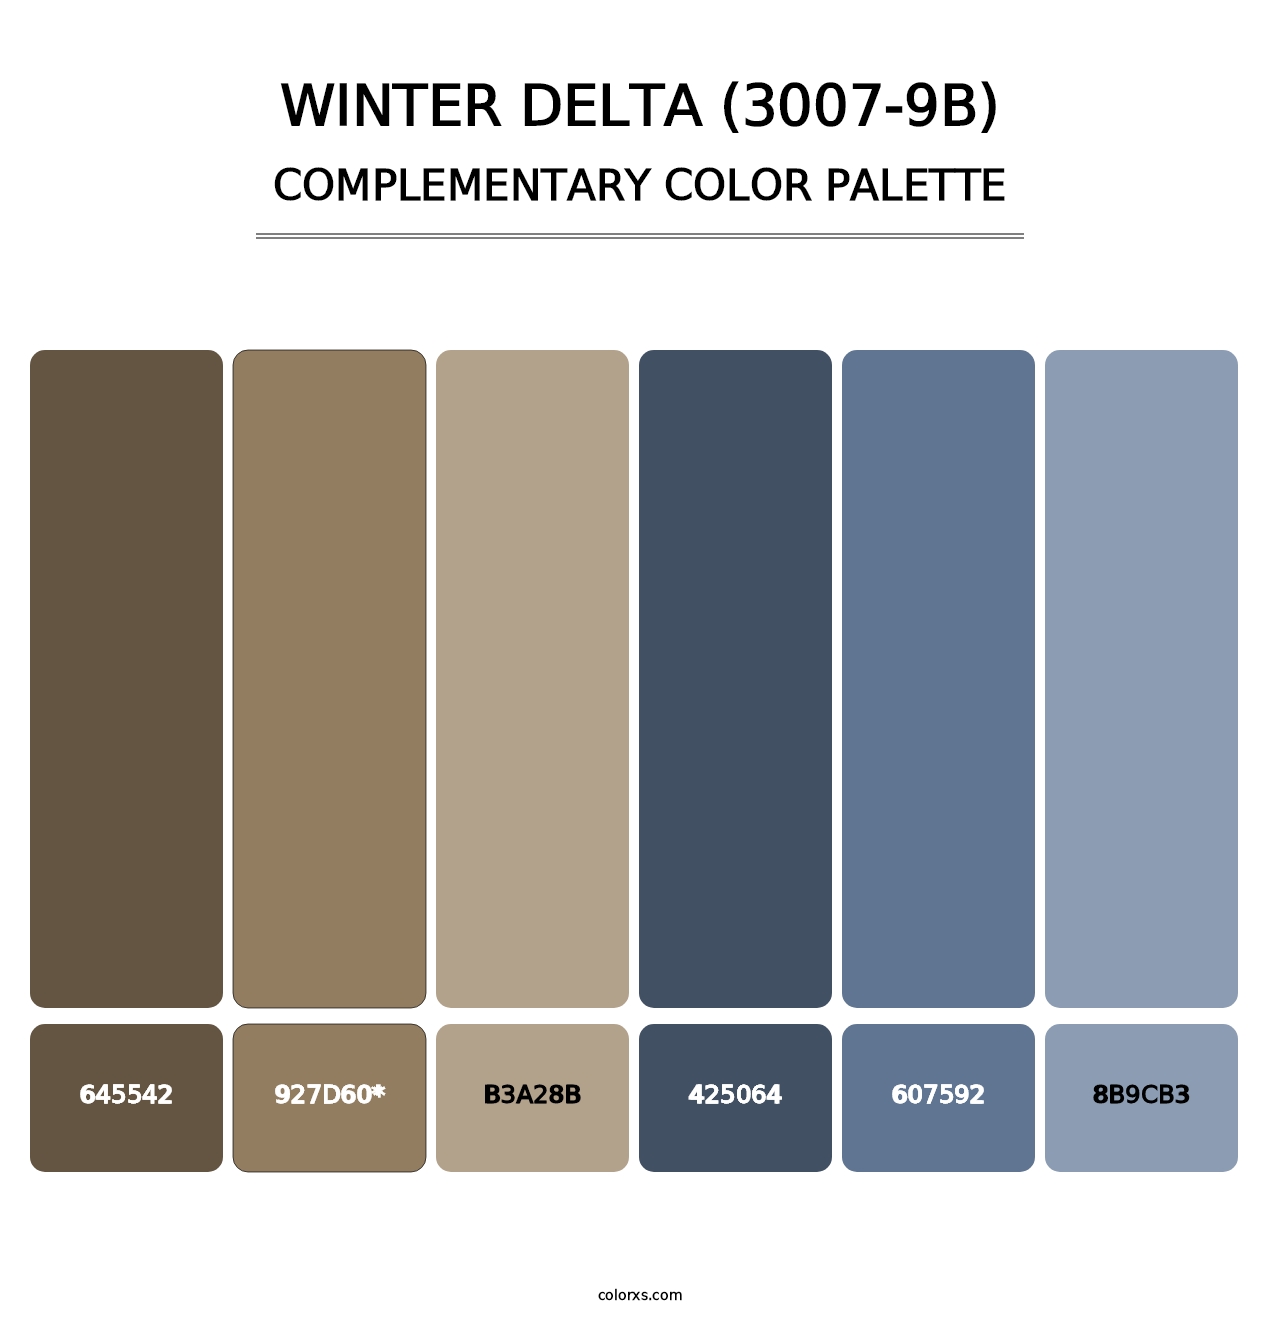 Winter Delta (3007-9B) - Complementary Color Palette